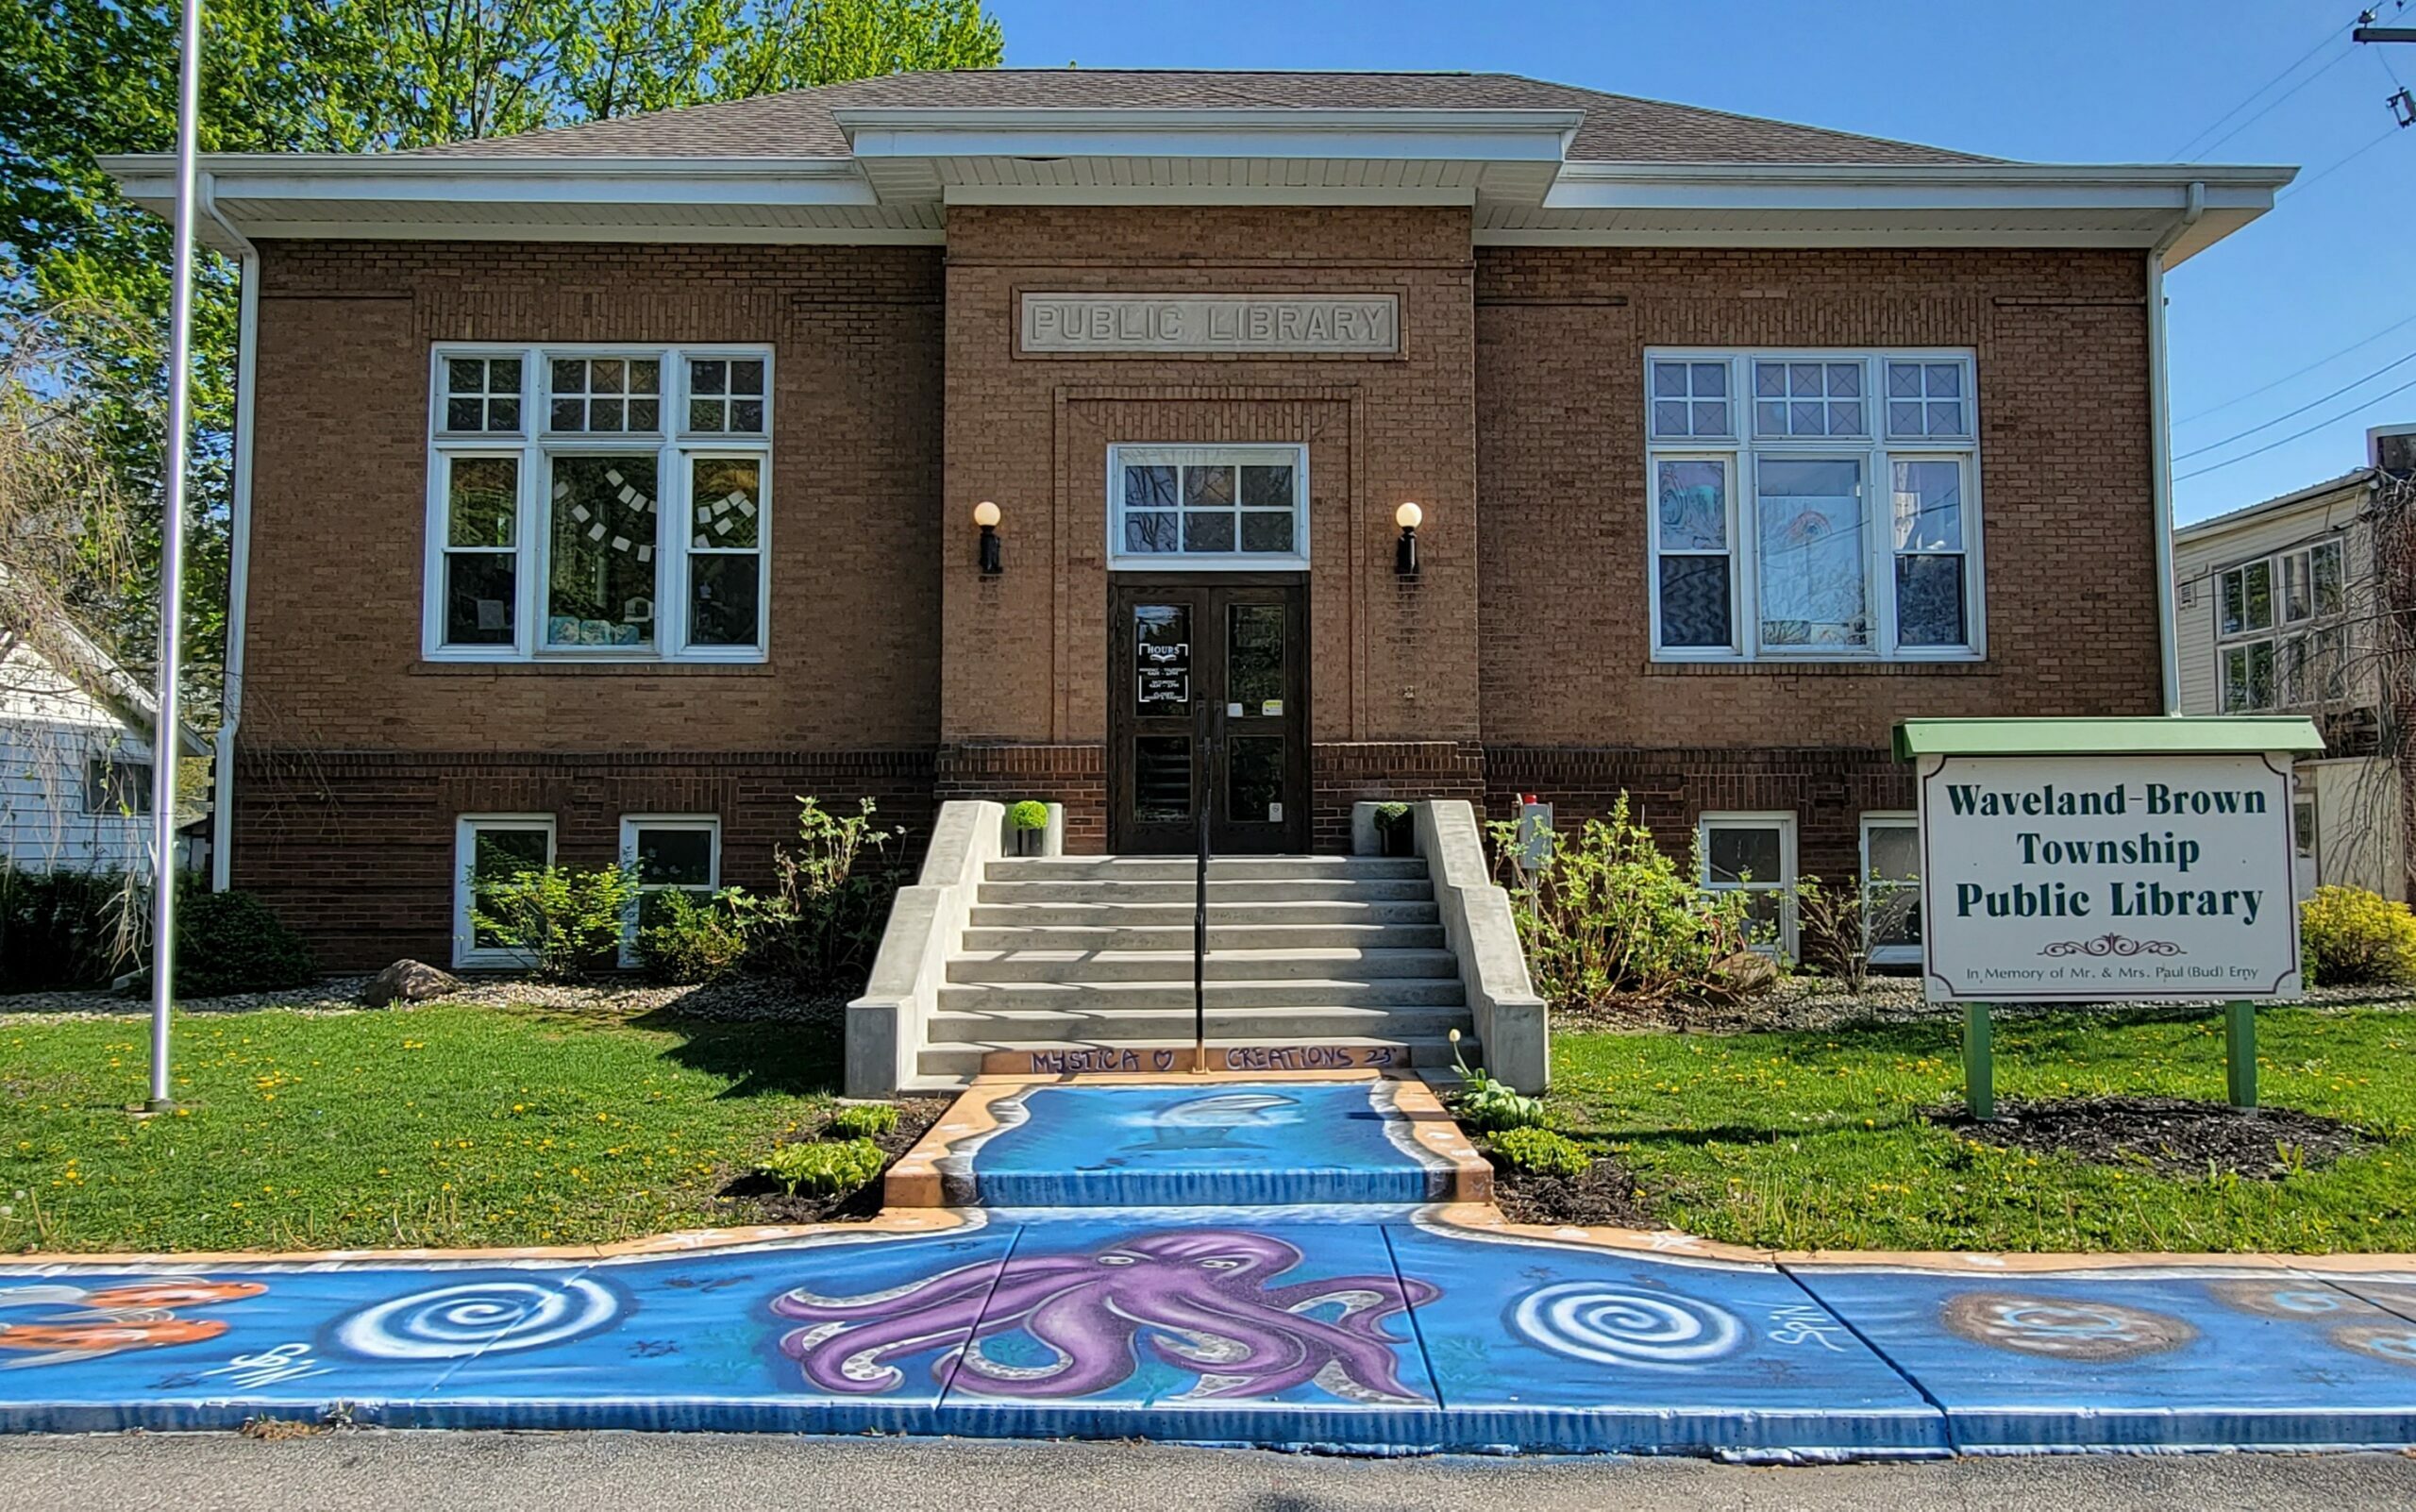 Waveland-Brown Township Public Library